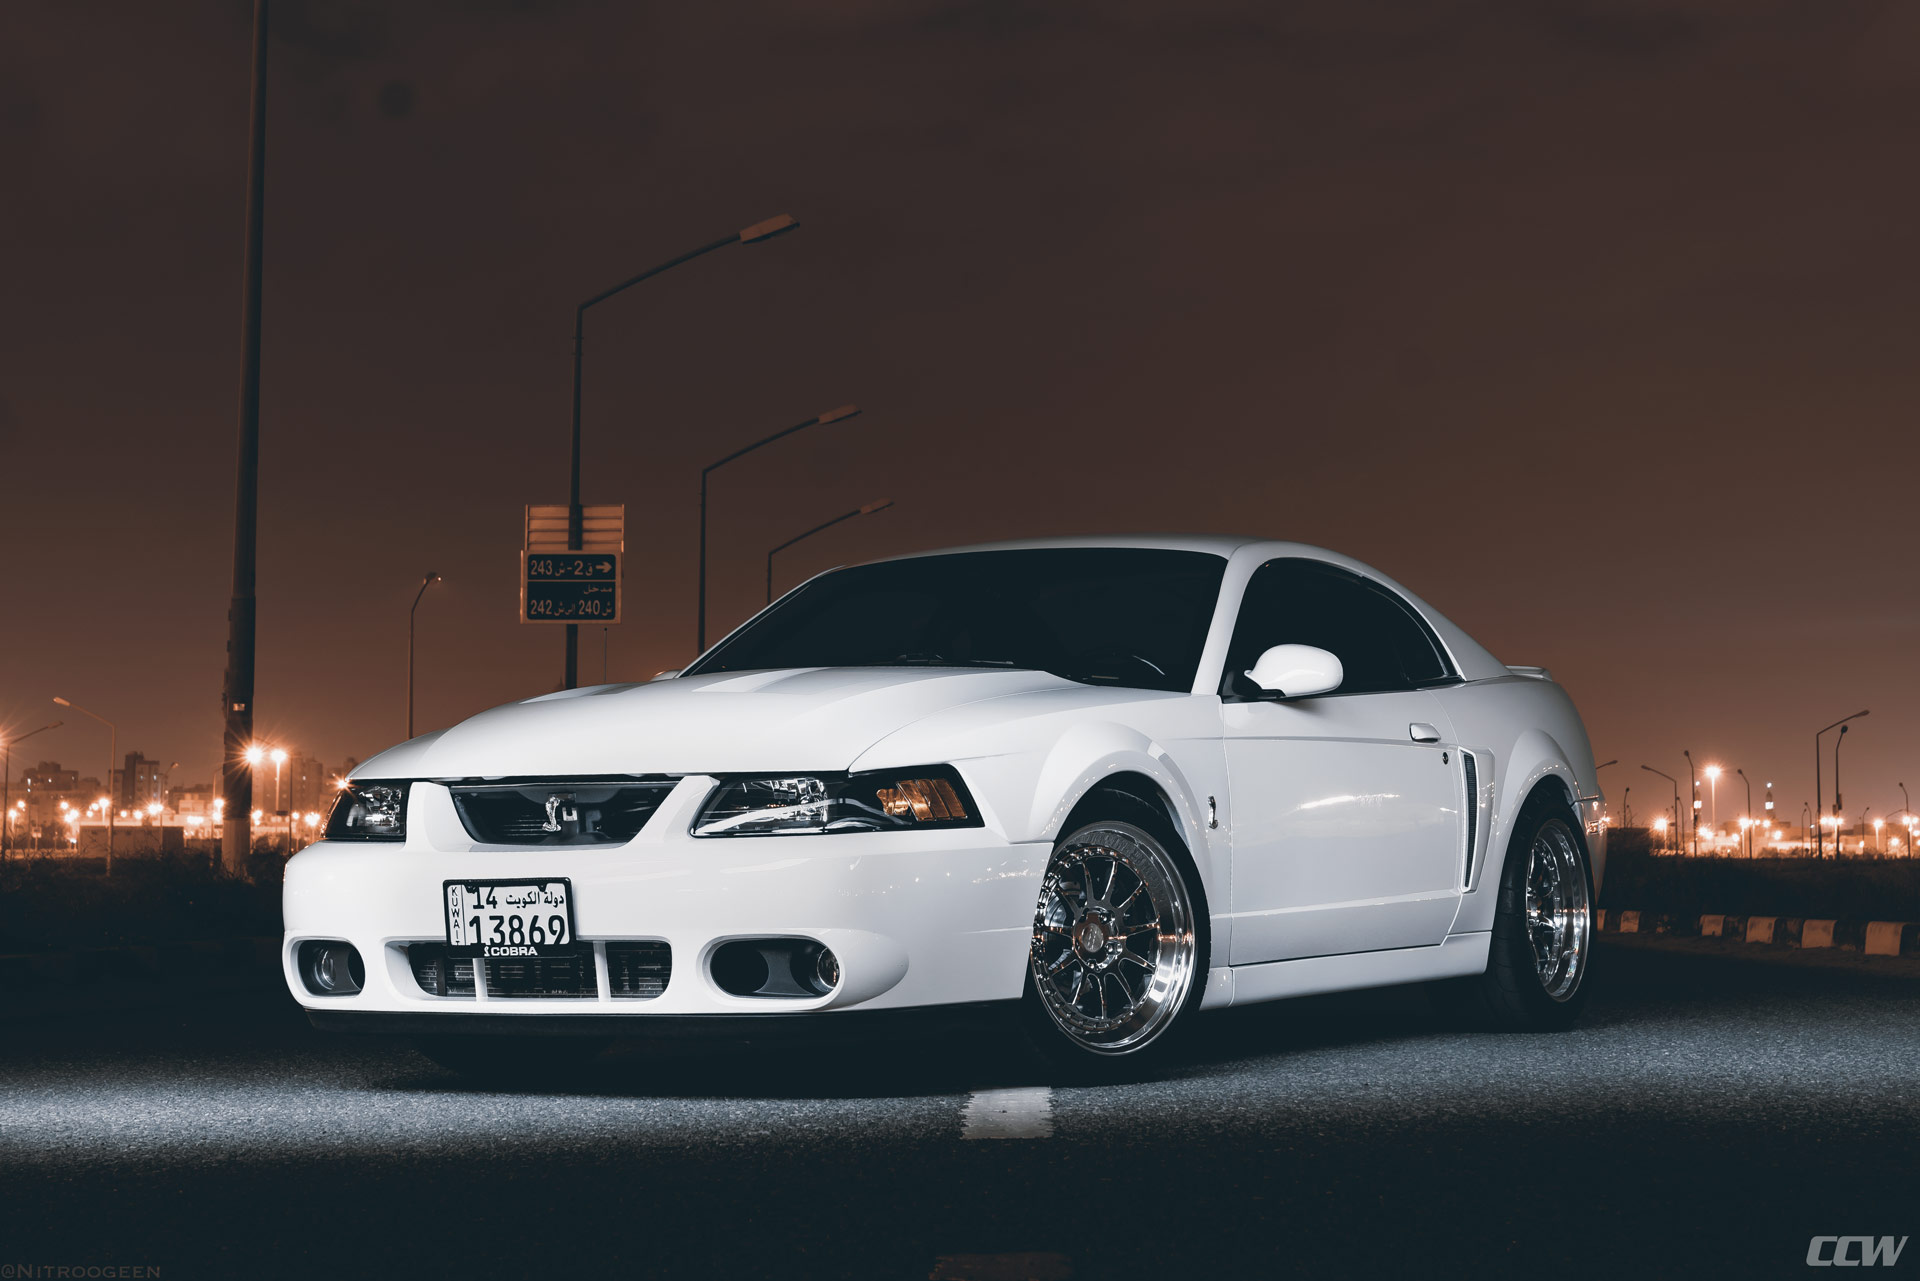 White 2003 Ford Mustang Shelby Cobra - CCW D110 Wheels In Polished Aluminum